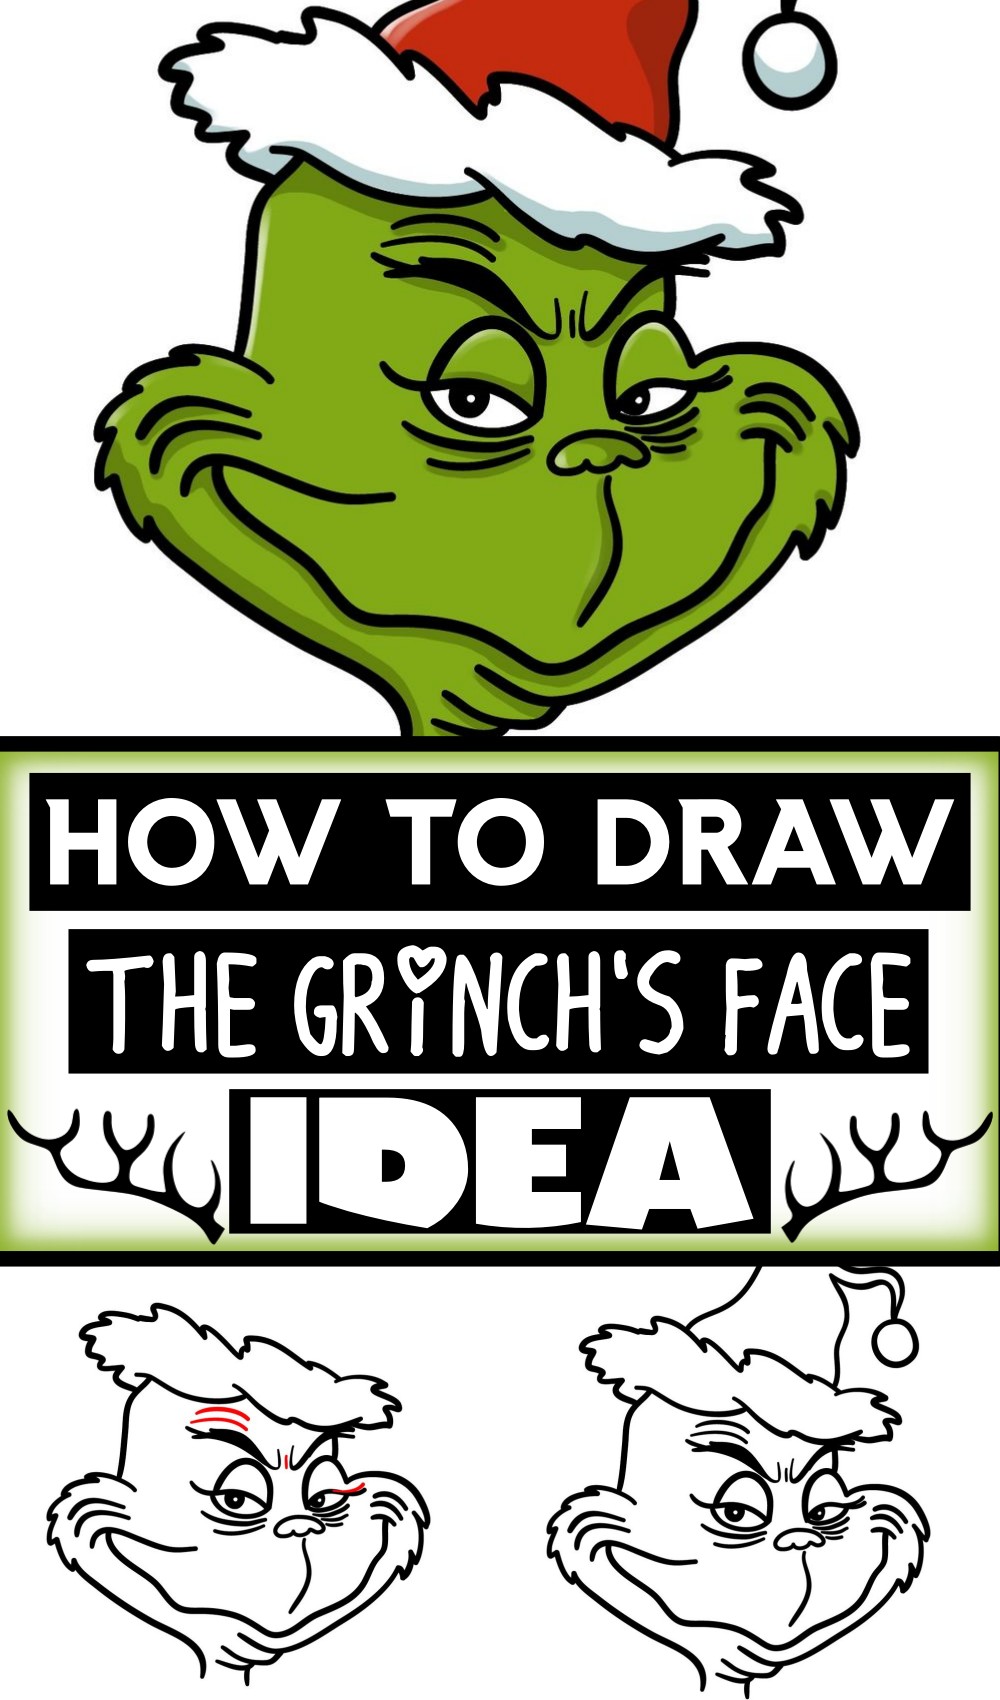 How To Draw The Grinch's Face